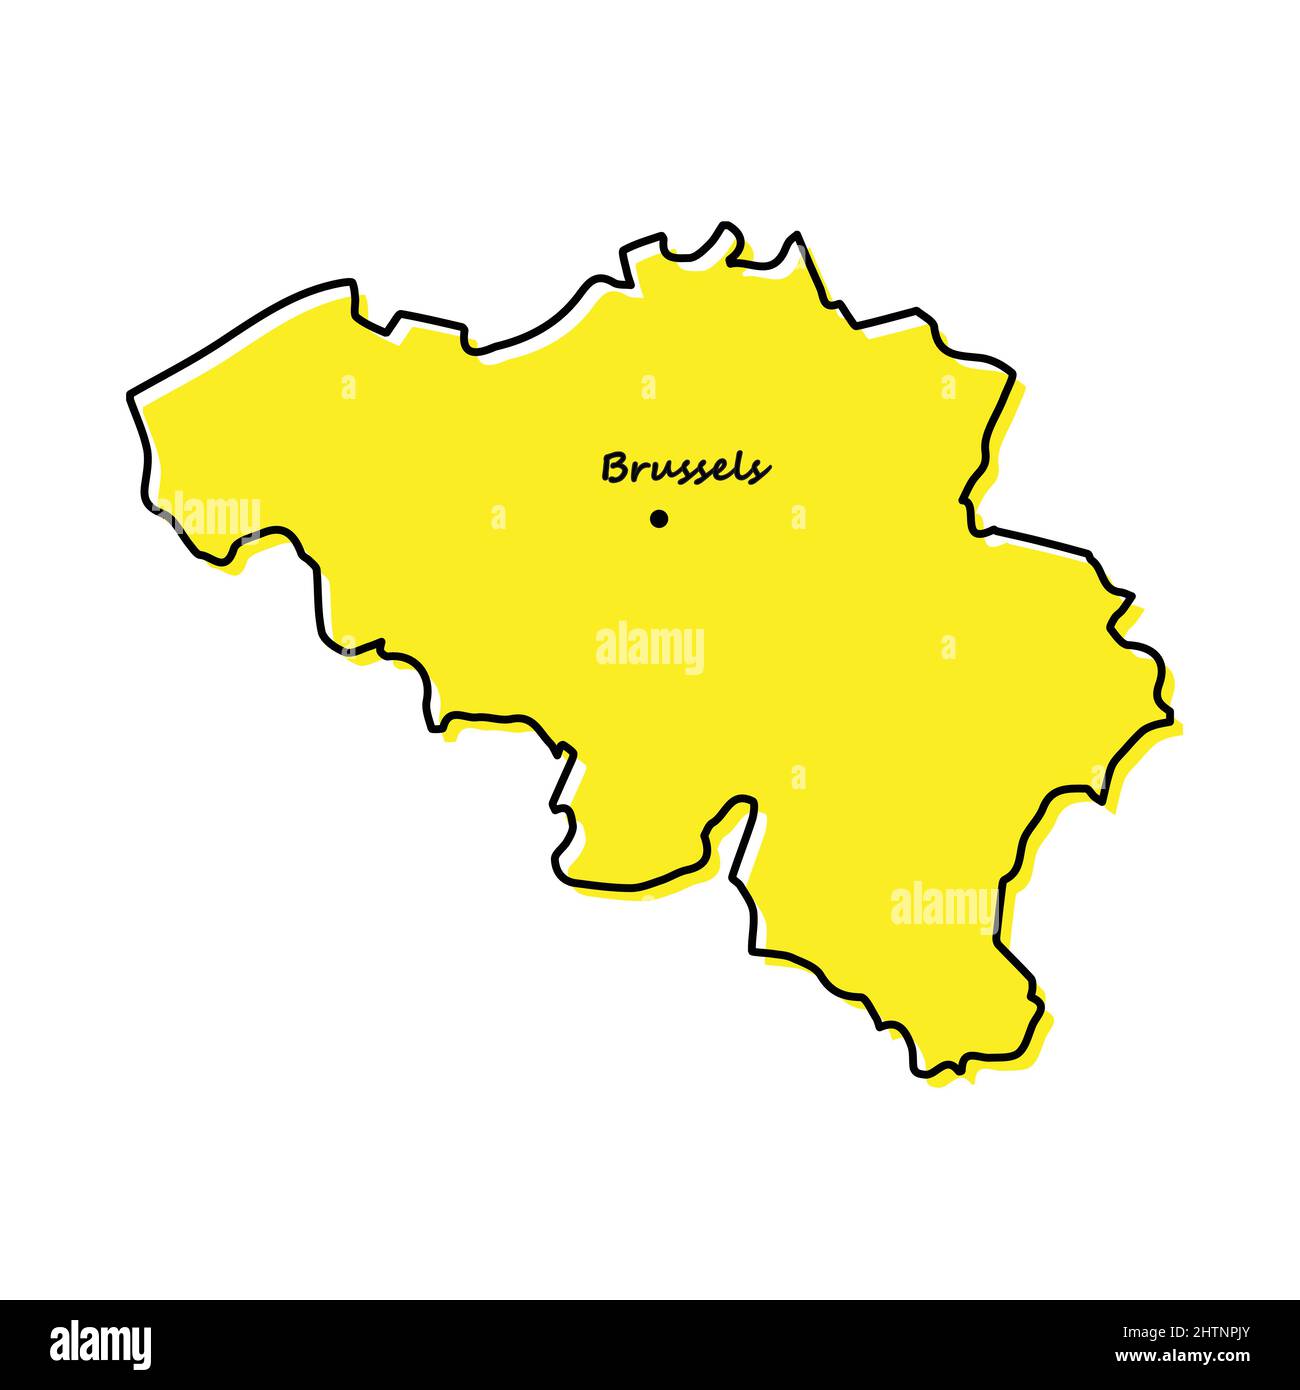 Simple outline map of Belgium with capital location. Stylized minimal line design Stock Vector